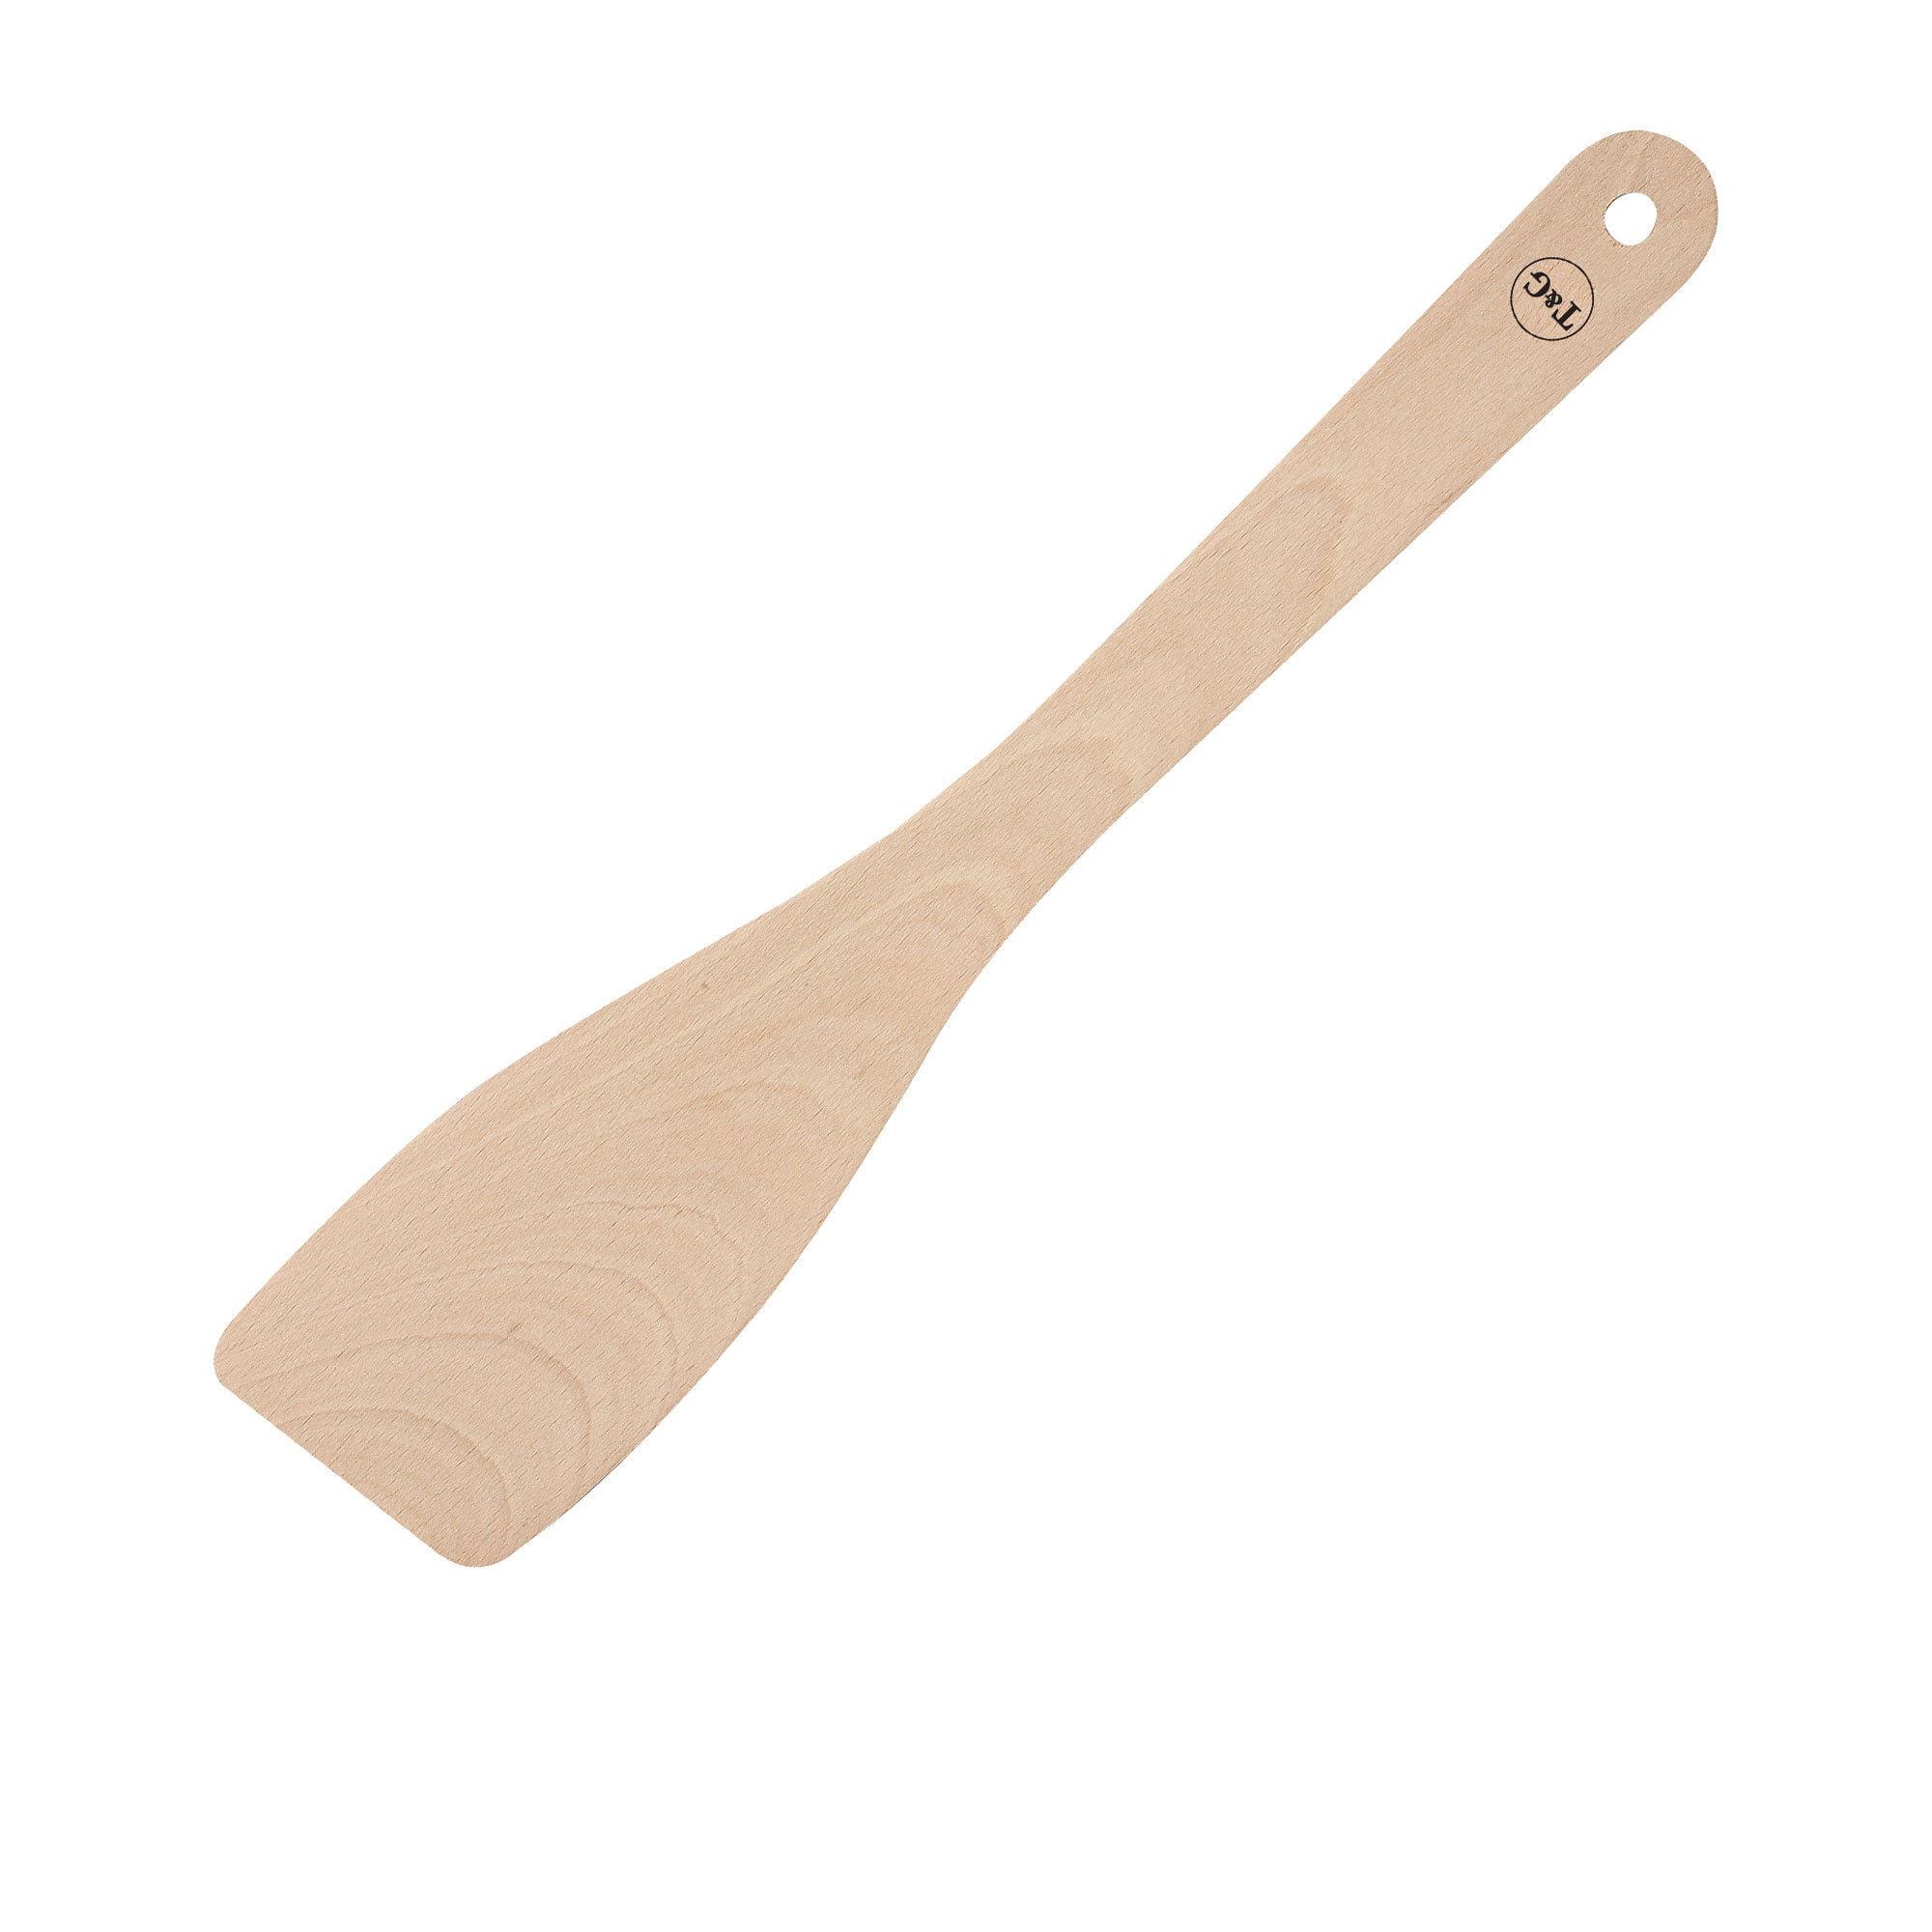 Wild Wood Wooden Curved Spatula 30cm Image 1